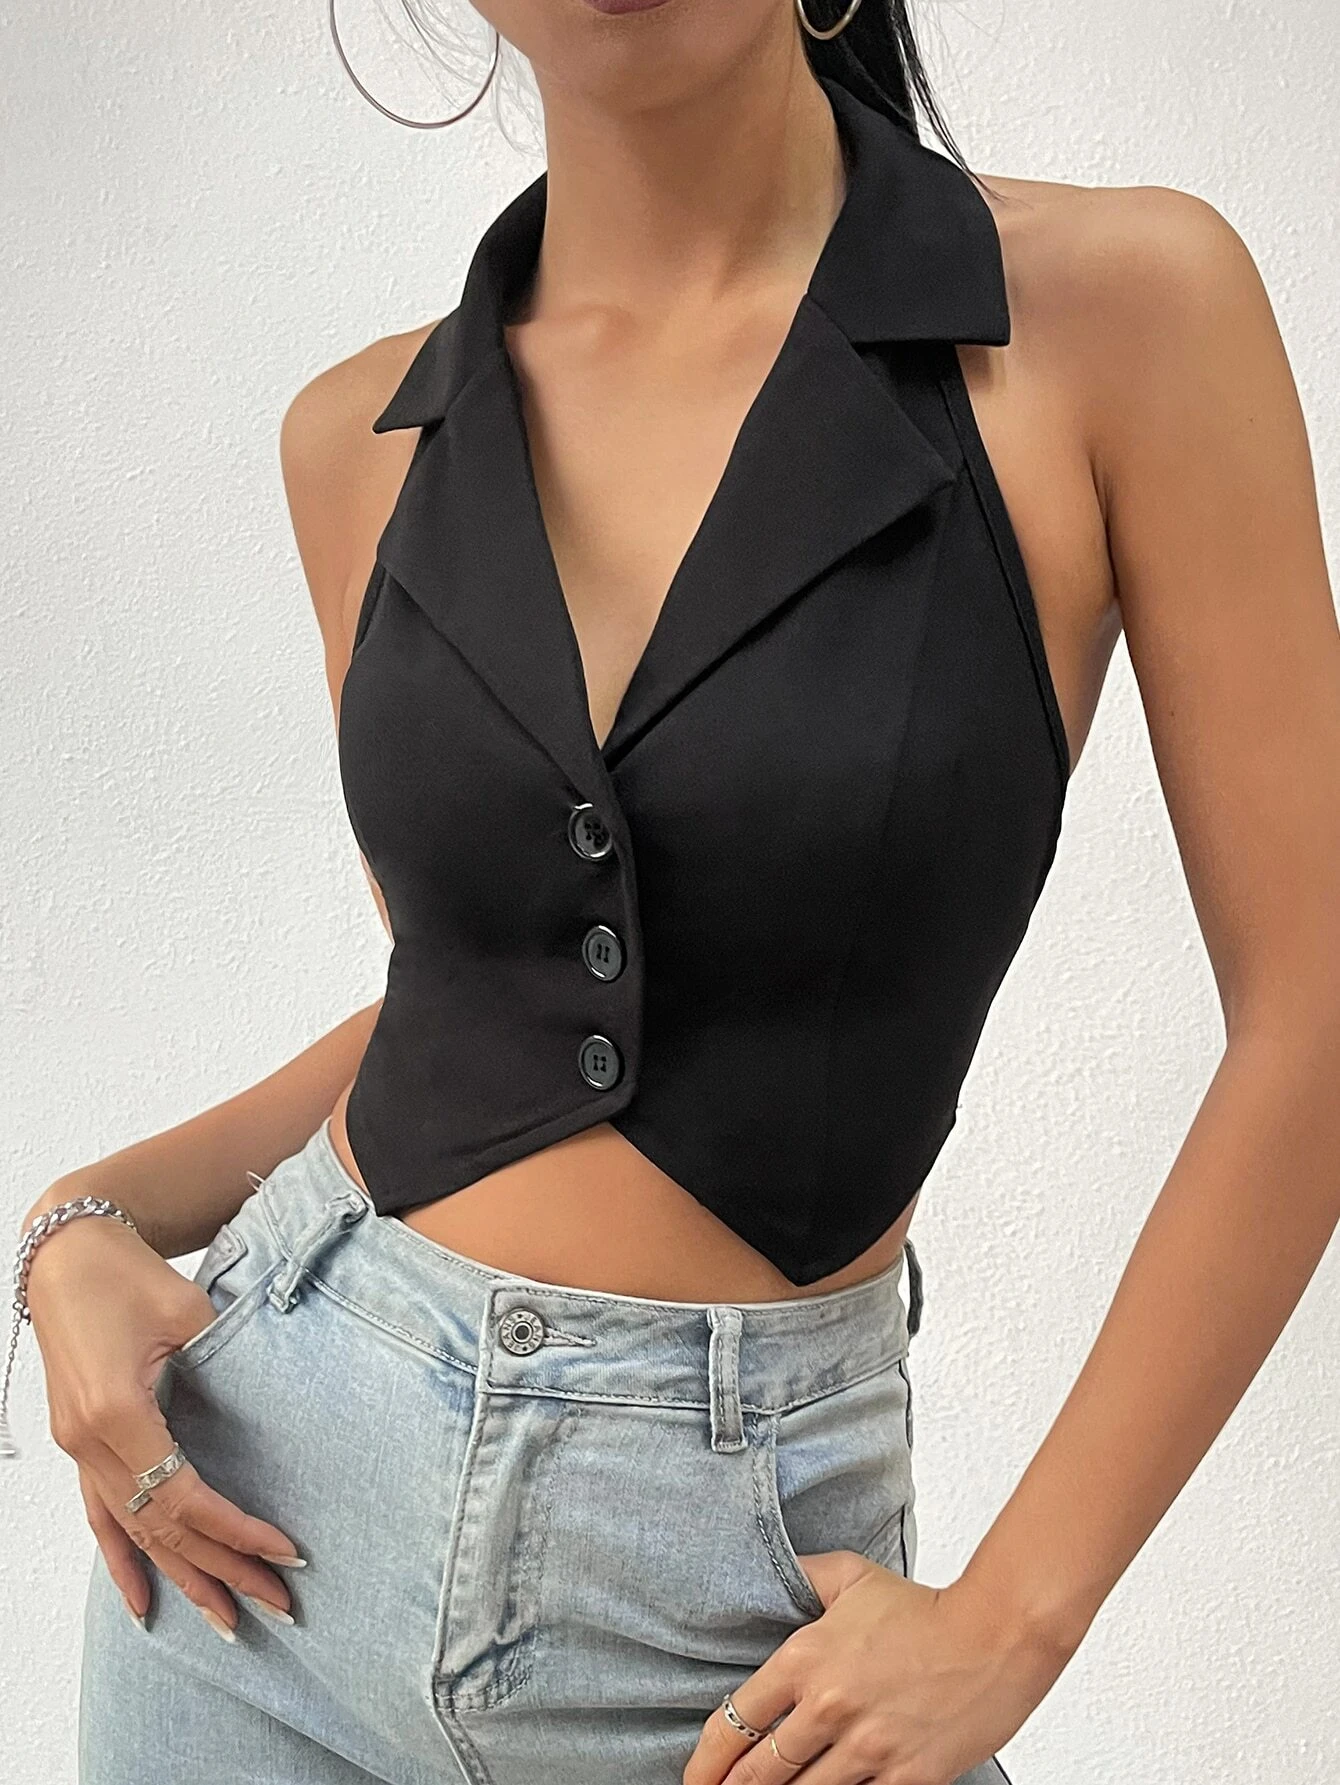 Vest Tops: Versatile and Stylish Tops for Every Occasion